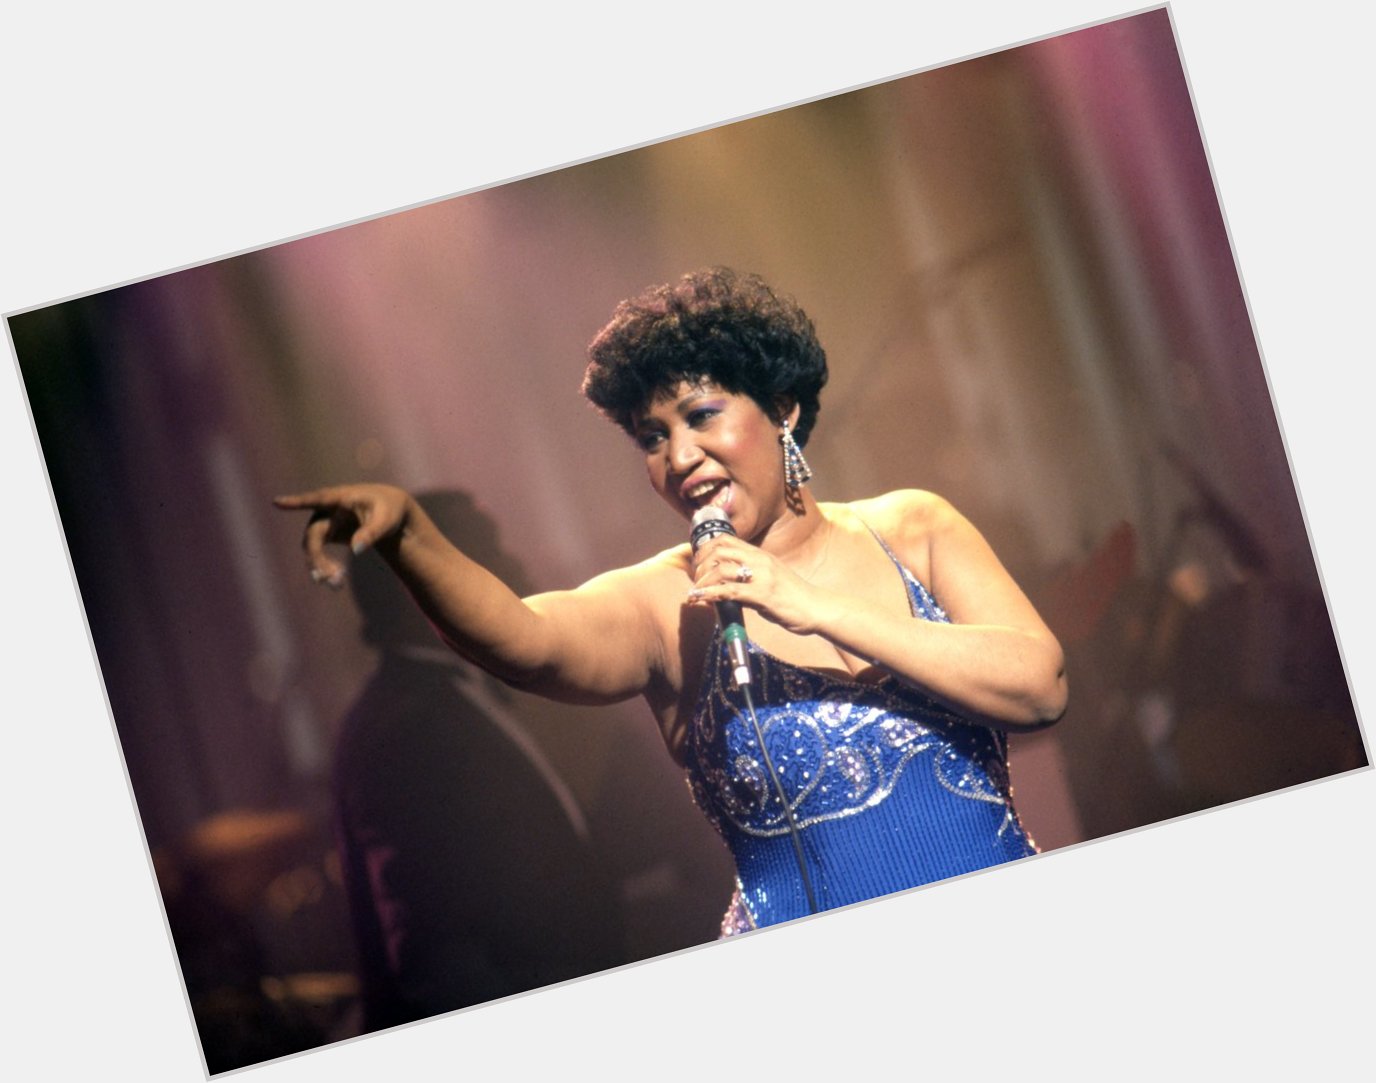 R-E-S-P-E-C-T!  That s what it means to me! Happy birthday to the Queen of Soul, Aretha Franklin!  